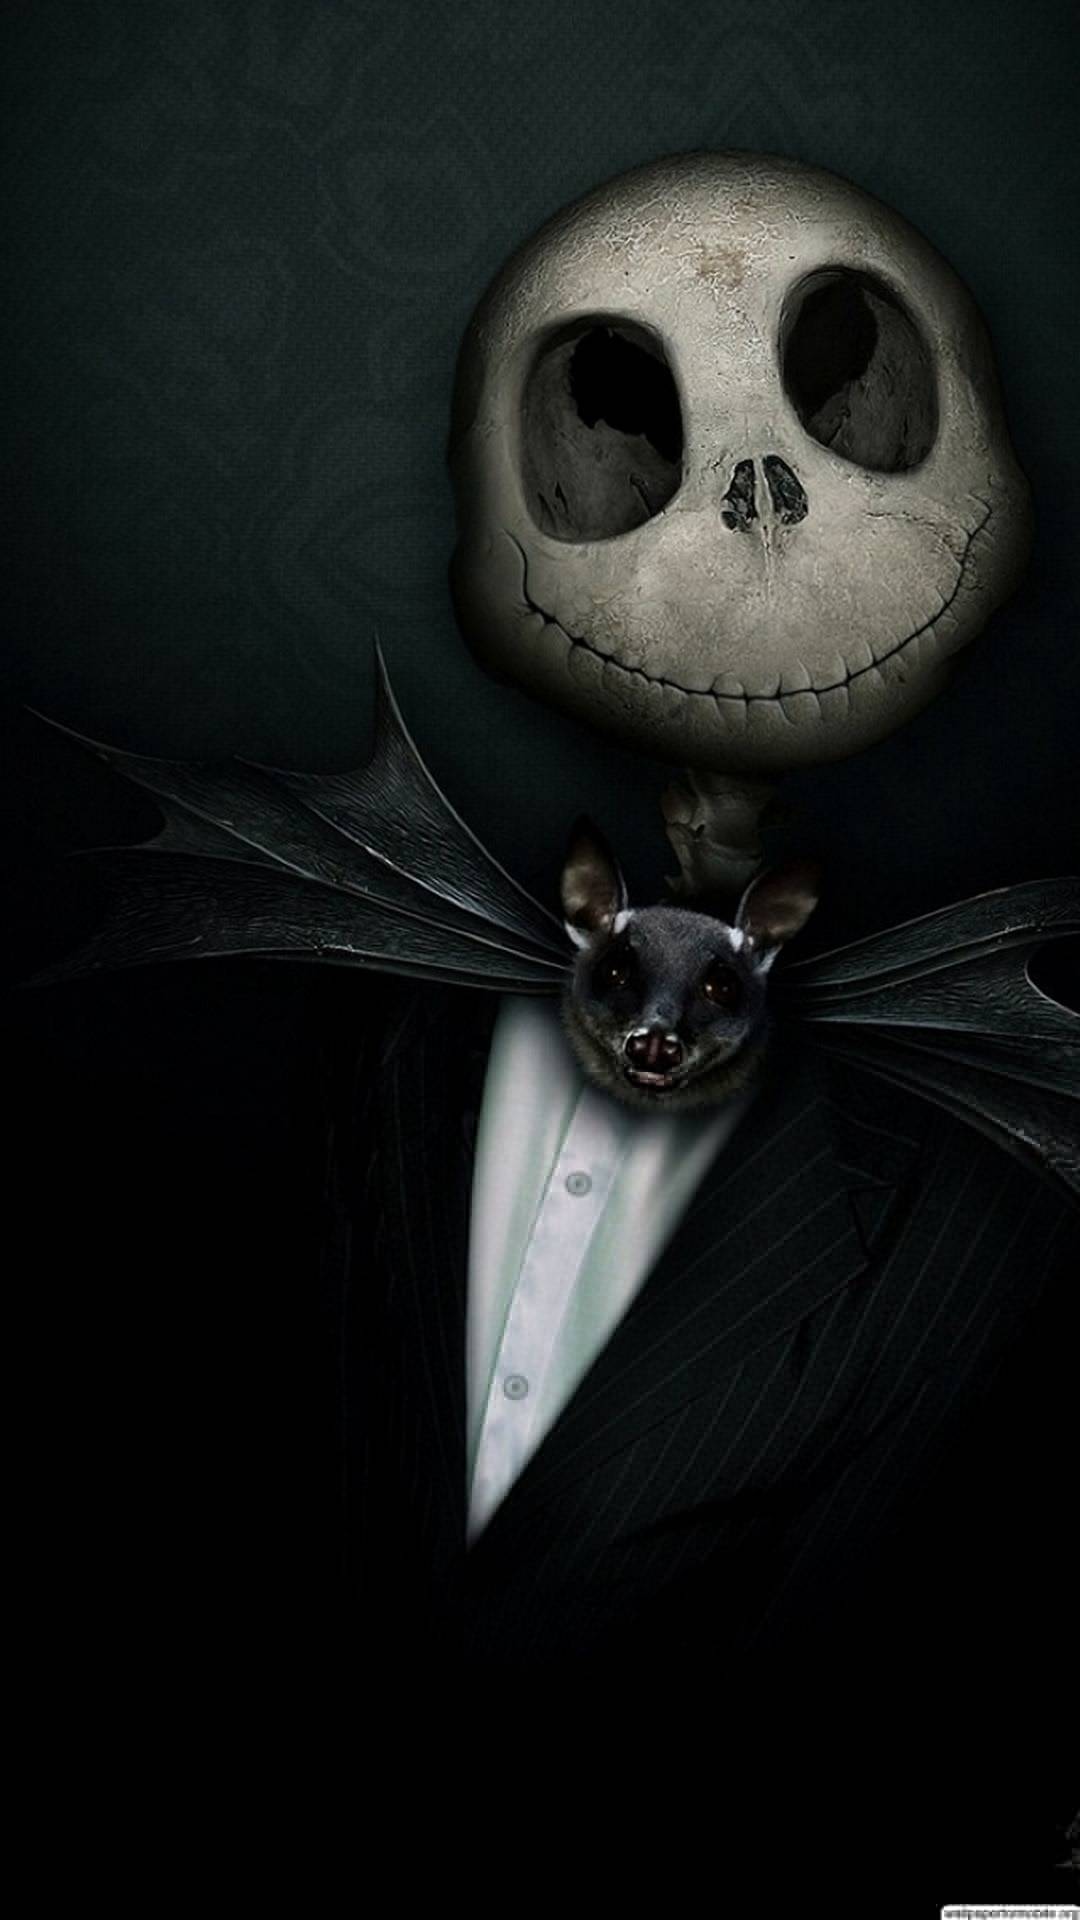 Nightmare Before Christmas Wallpaper For iPhone. Wallpaper for Mobile